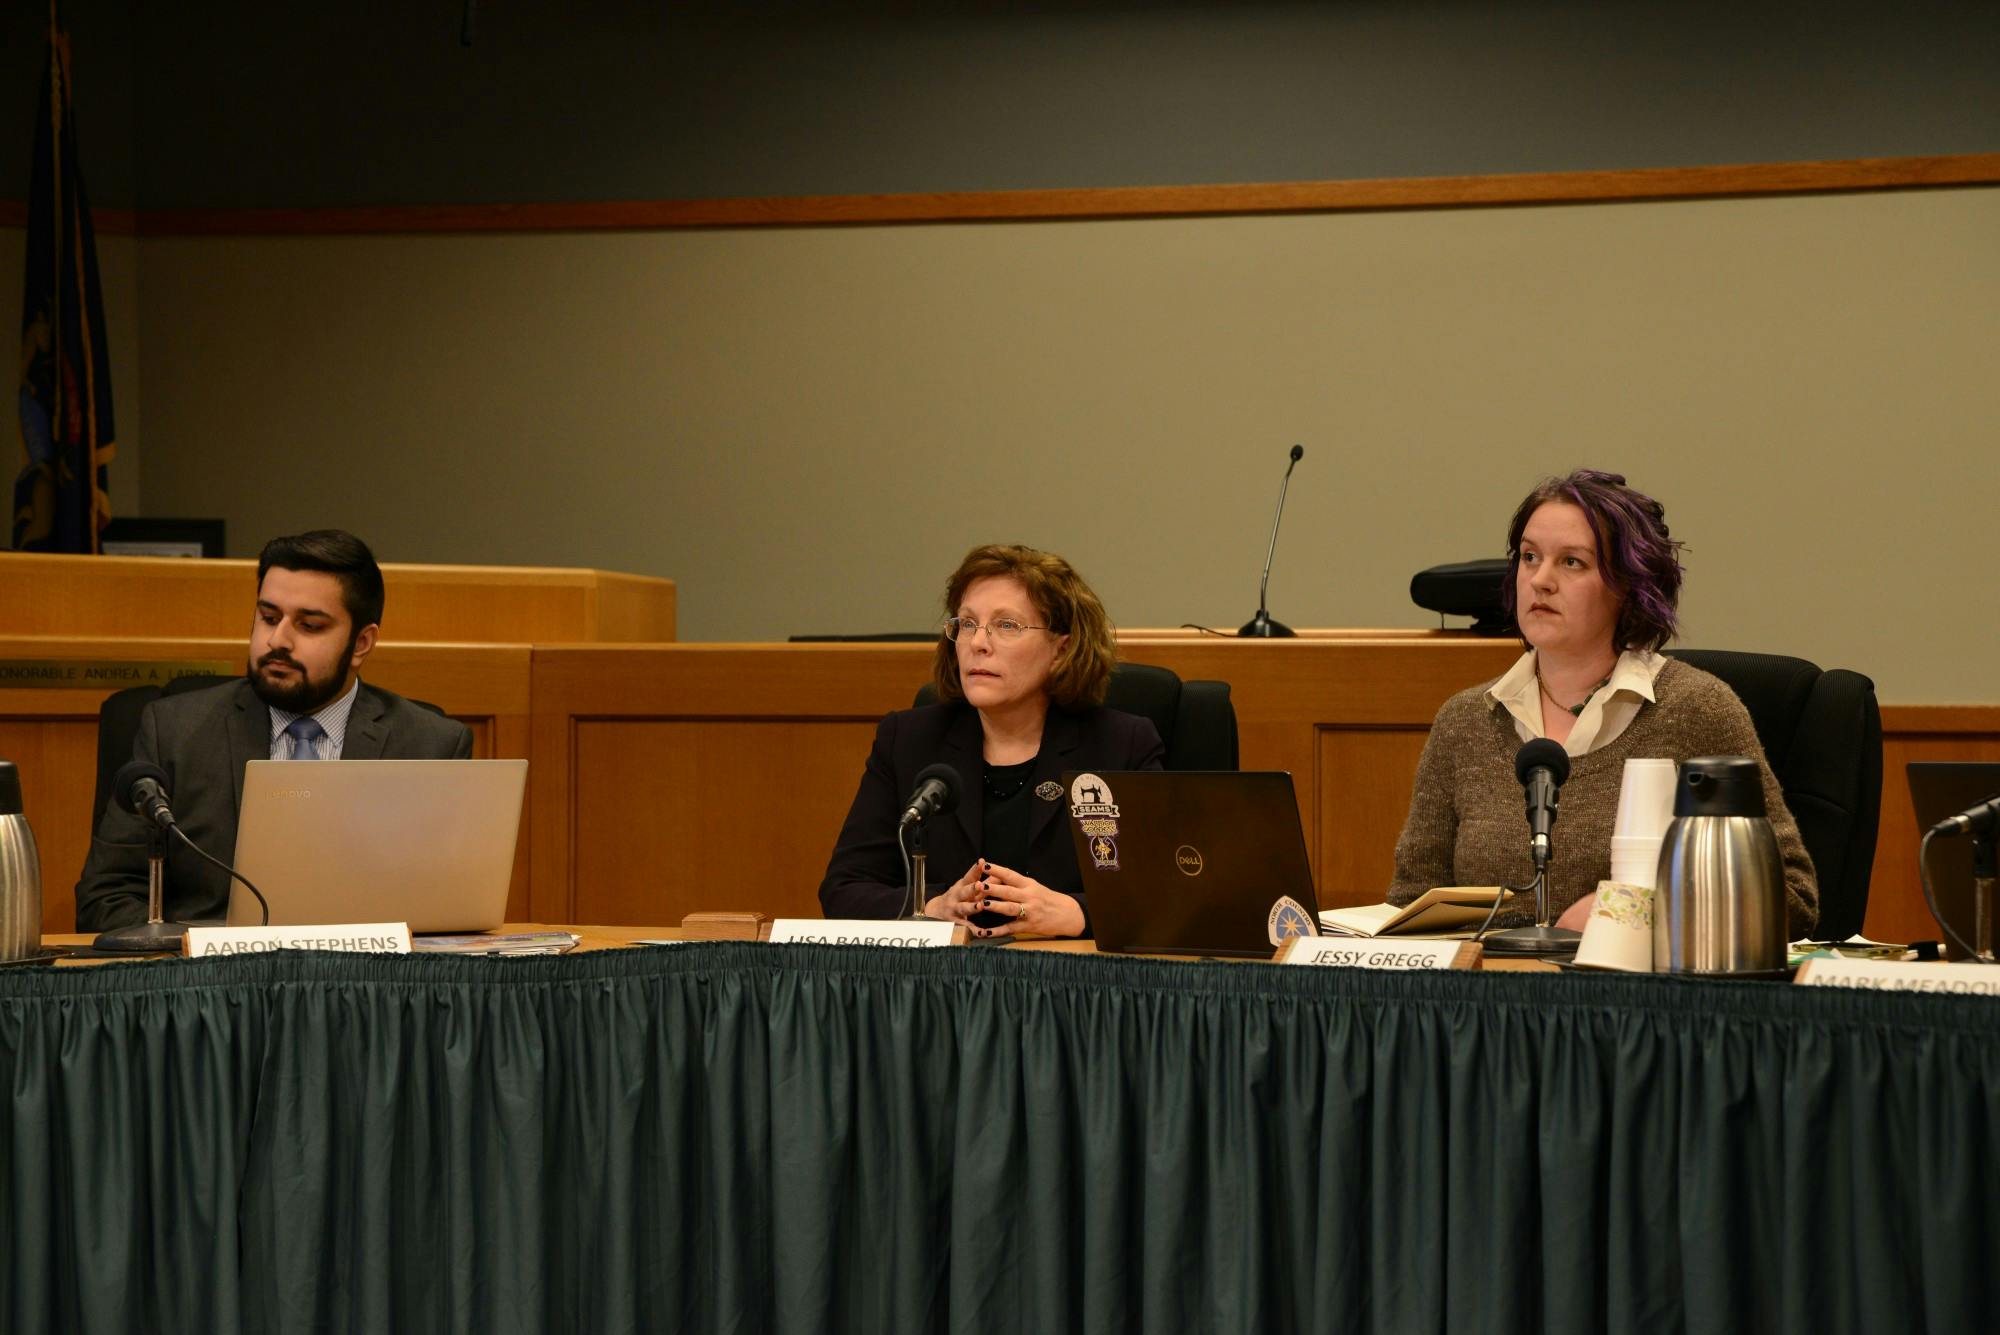 <p>Newly elected city council members including Mayor Pro Tem Aaron Stephens (left), Lisa Babcock and Jessy Gregg during the East Lansing City Council meeting at the East Lansing City Offices on Nov. 12, 2019.</p>